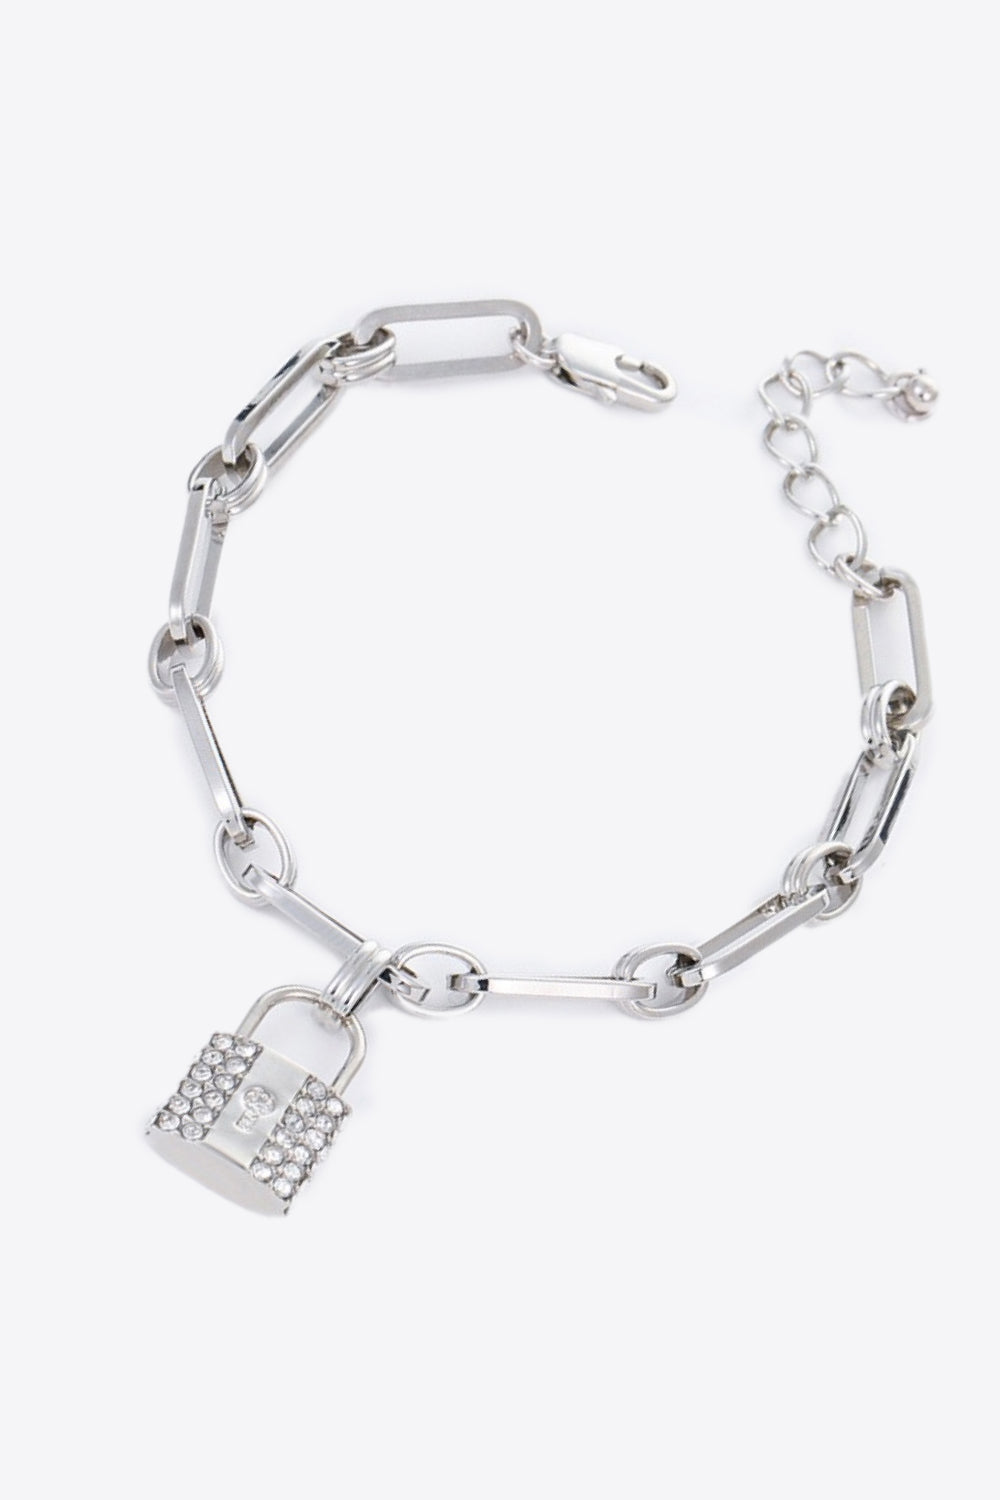 5-Piece Wholesale Lock Charm Chain Bracelet - Tophatter Deals and Online Shopping - Electronics, Jewelry, Beauty, Health, Gadgets, Fashion - Tophatter's Discounts & Offers - tophatters - tophatters.co